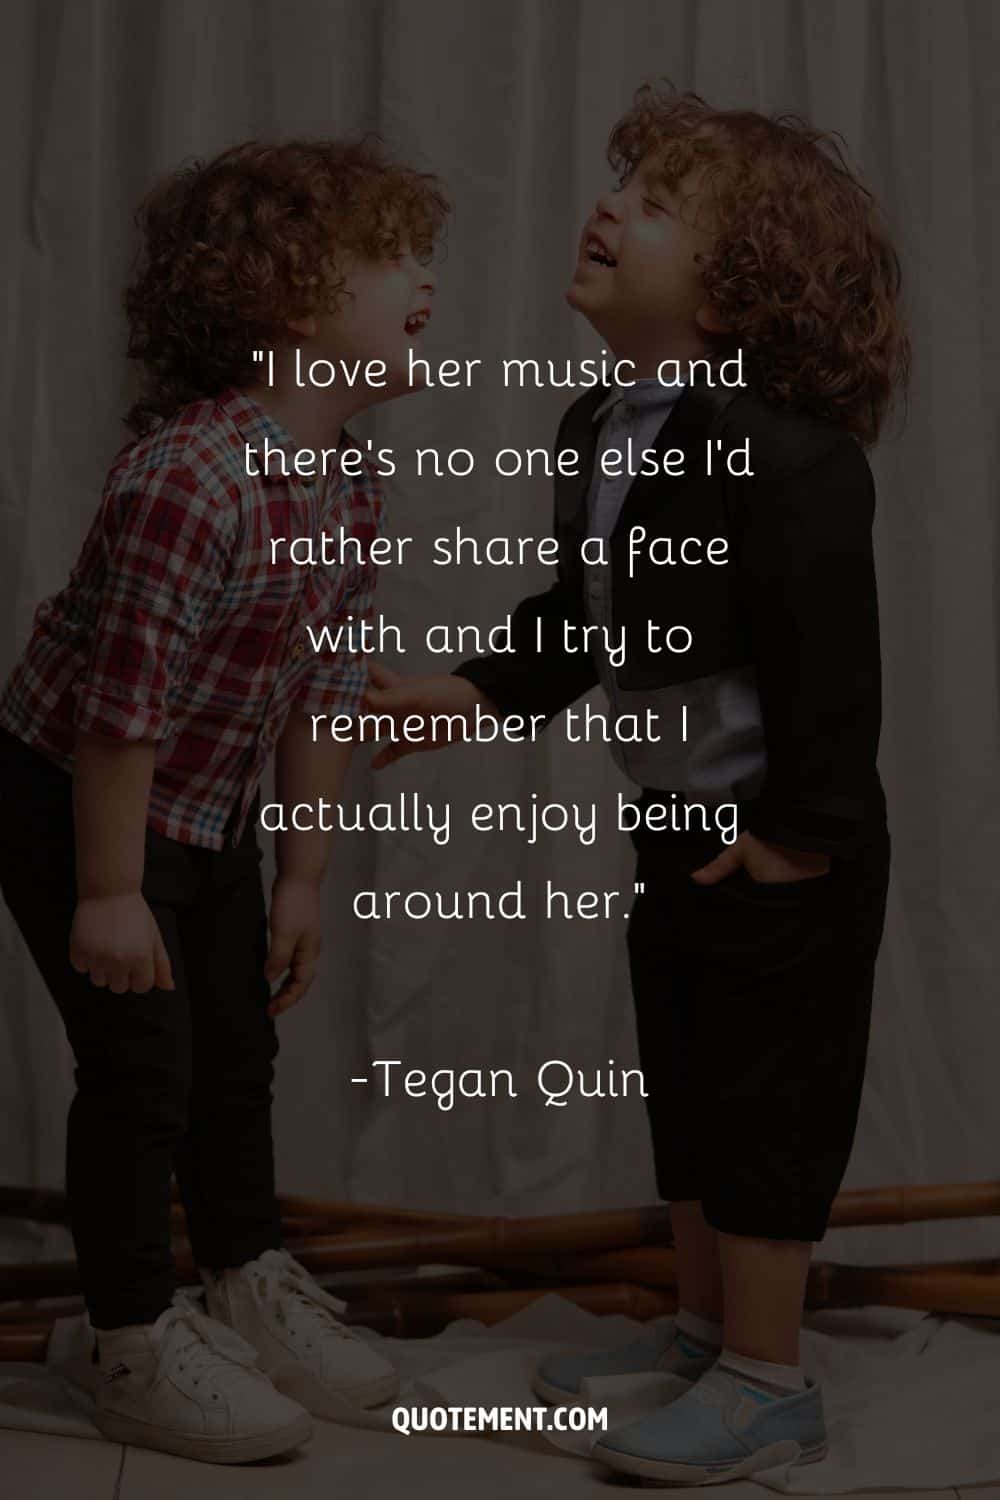 “I love her music and there’s no one else I'd rather share a face with and I try to remember that I actually enjoy being around her.” ― Tegan Quin